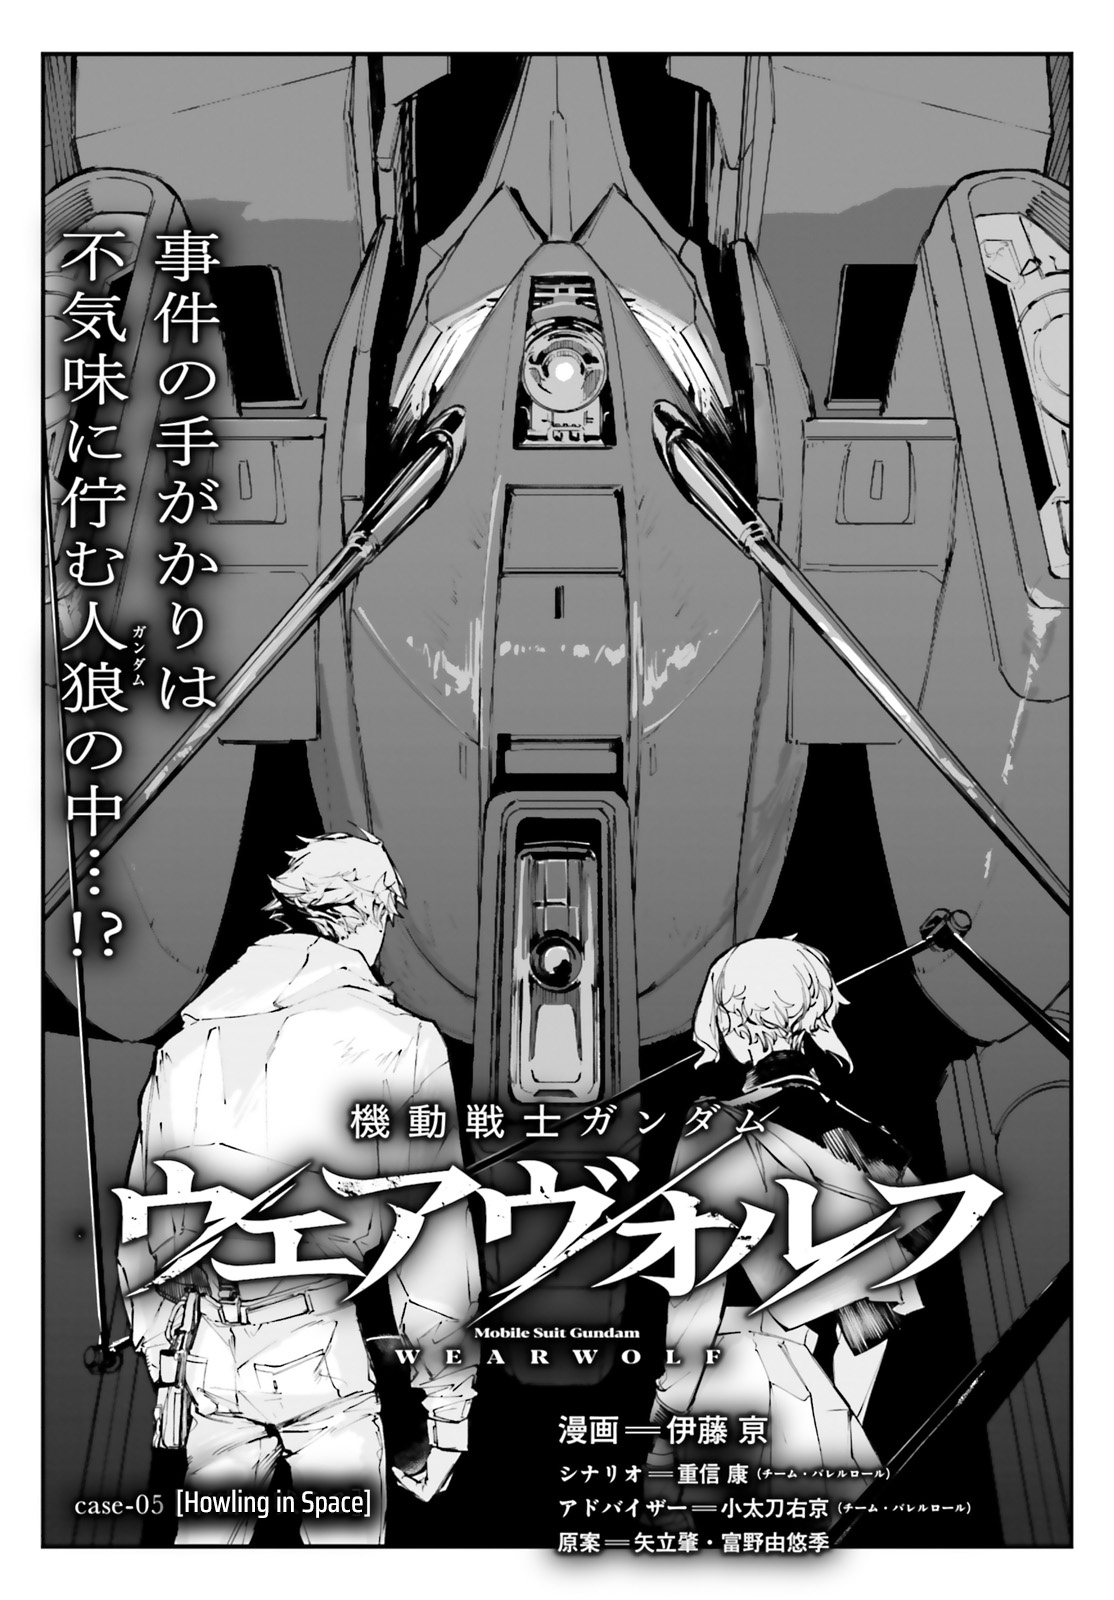 Mobile Suit Gundam Wearwolf Chapter 5: Case-05 Howling In Space - Picture 1